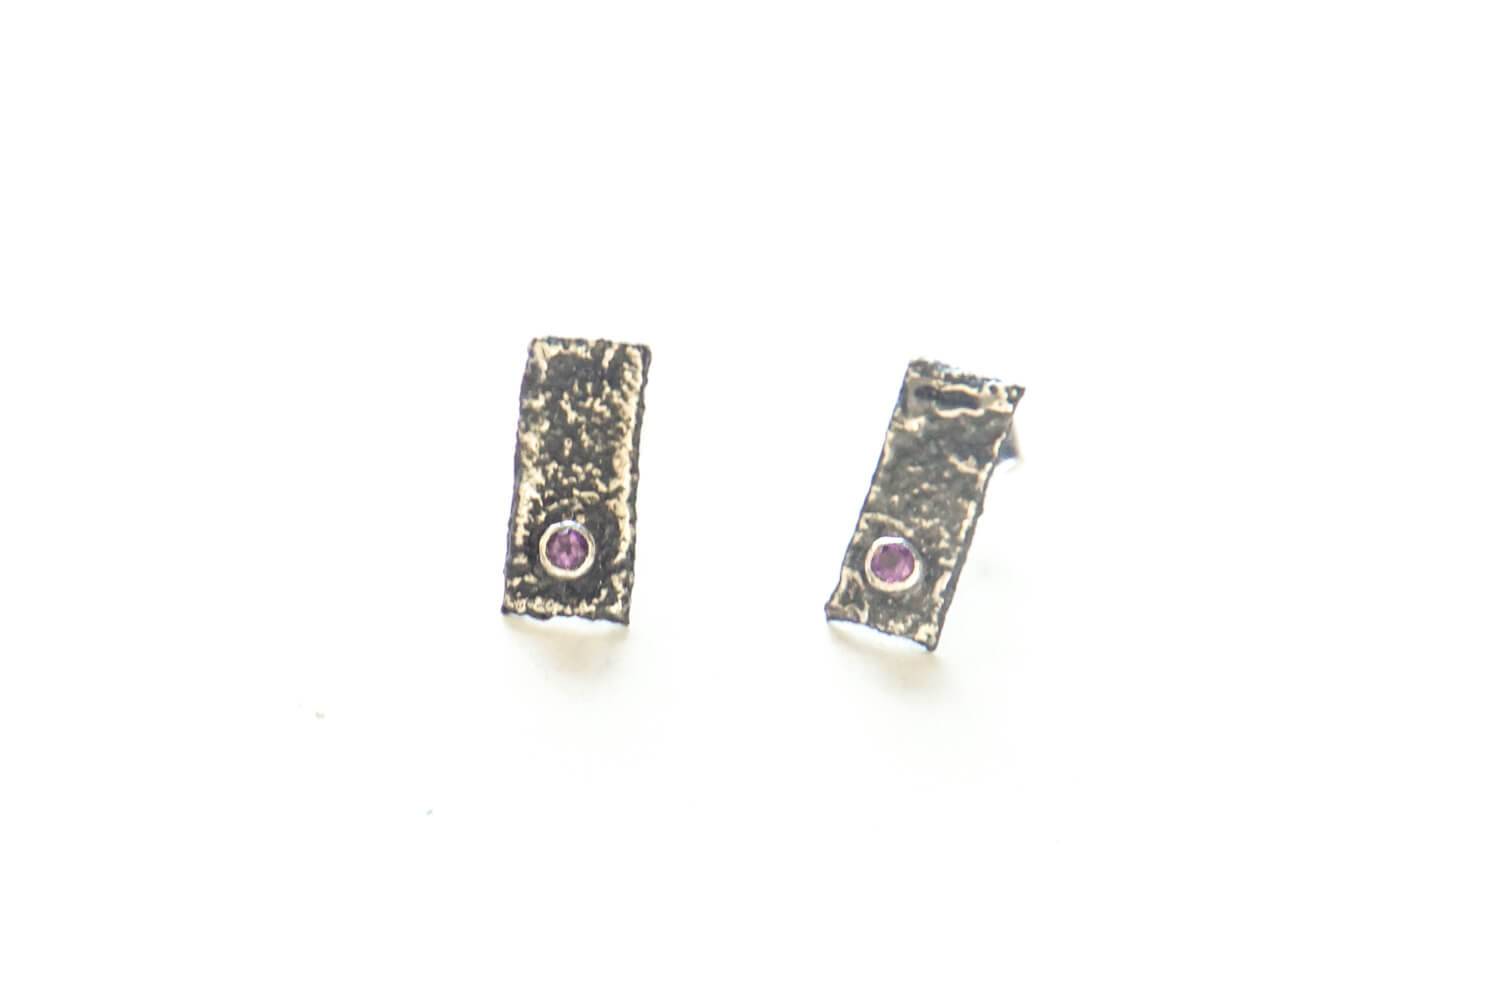 Small Oblong Studs